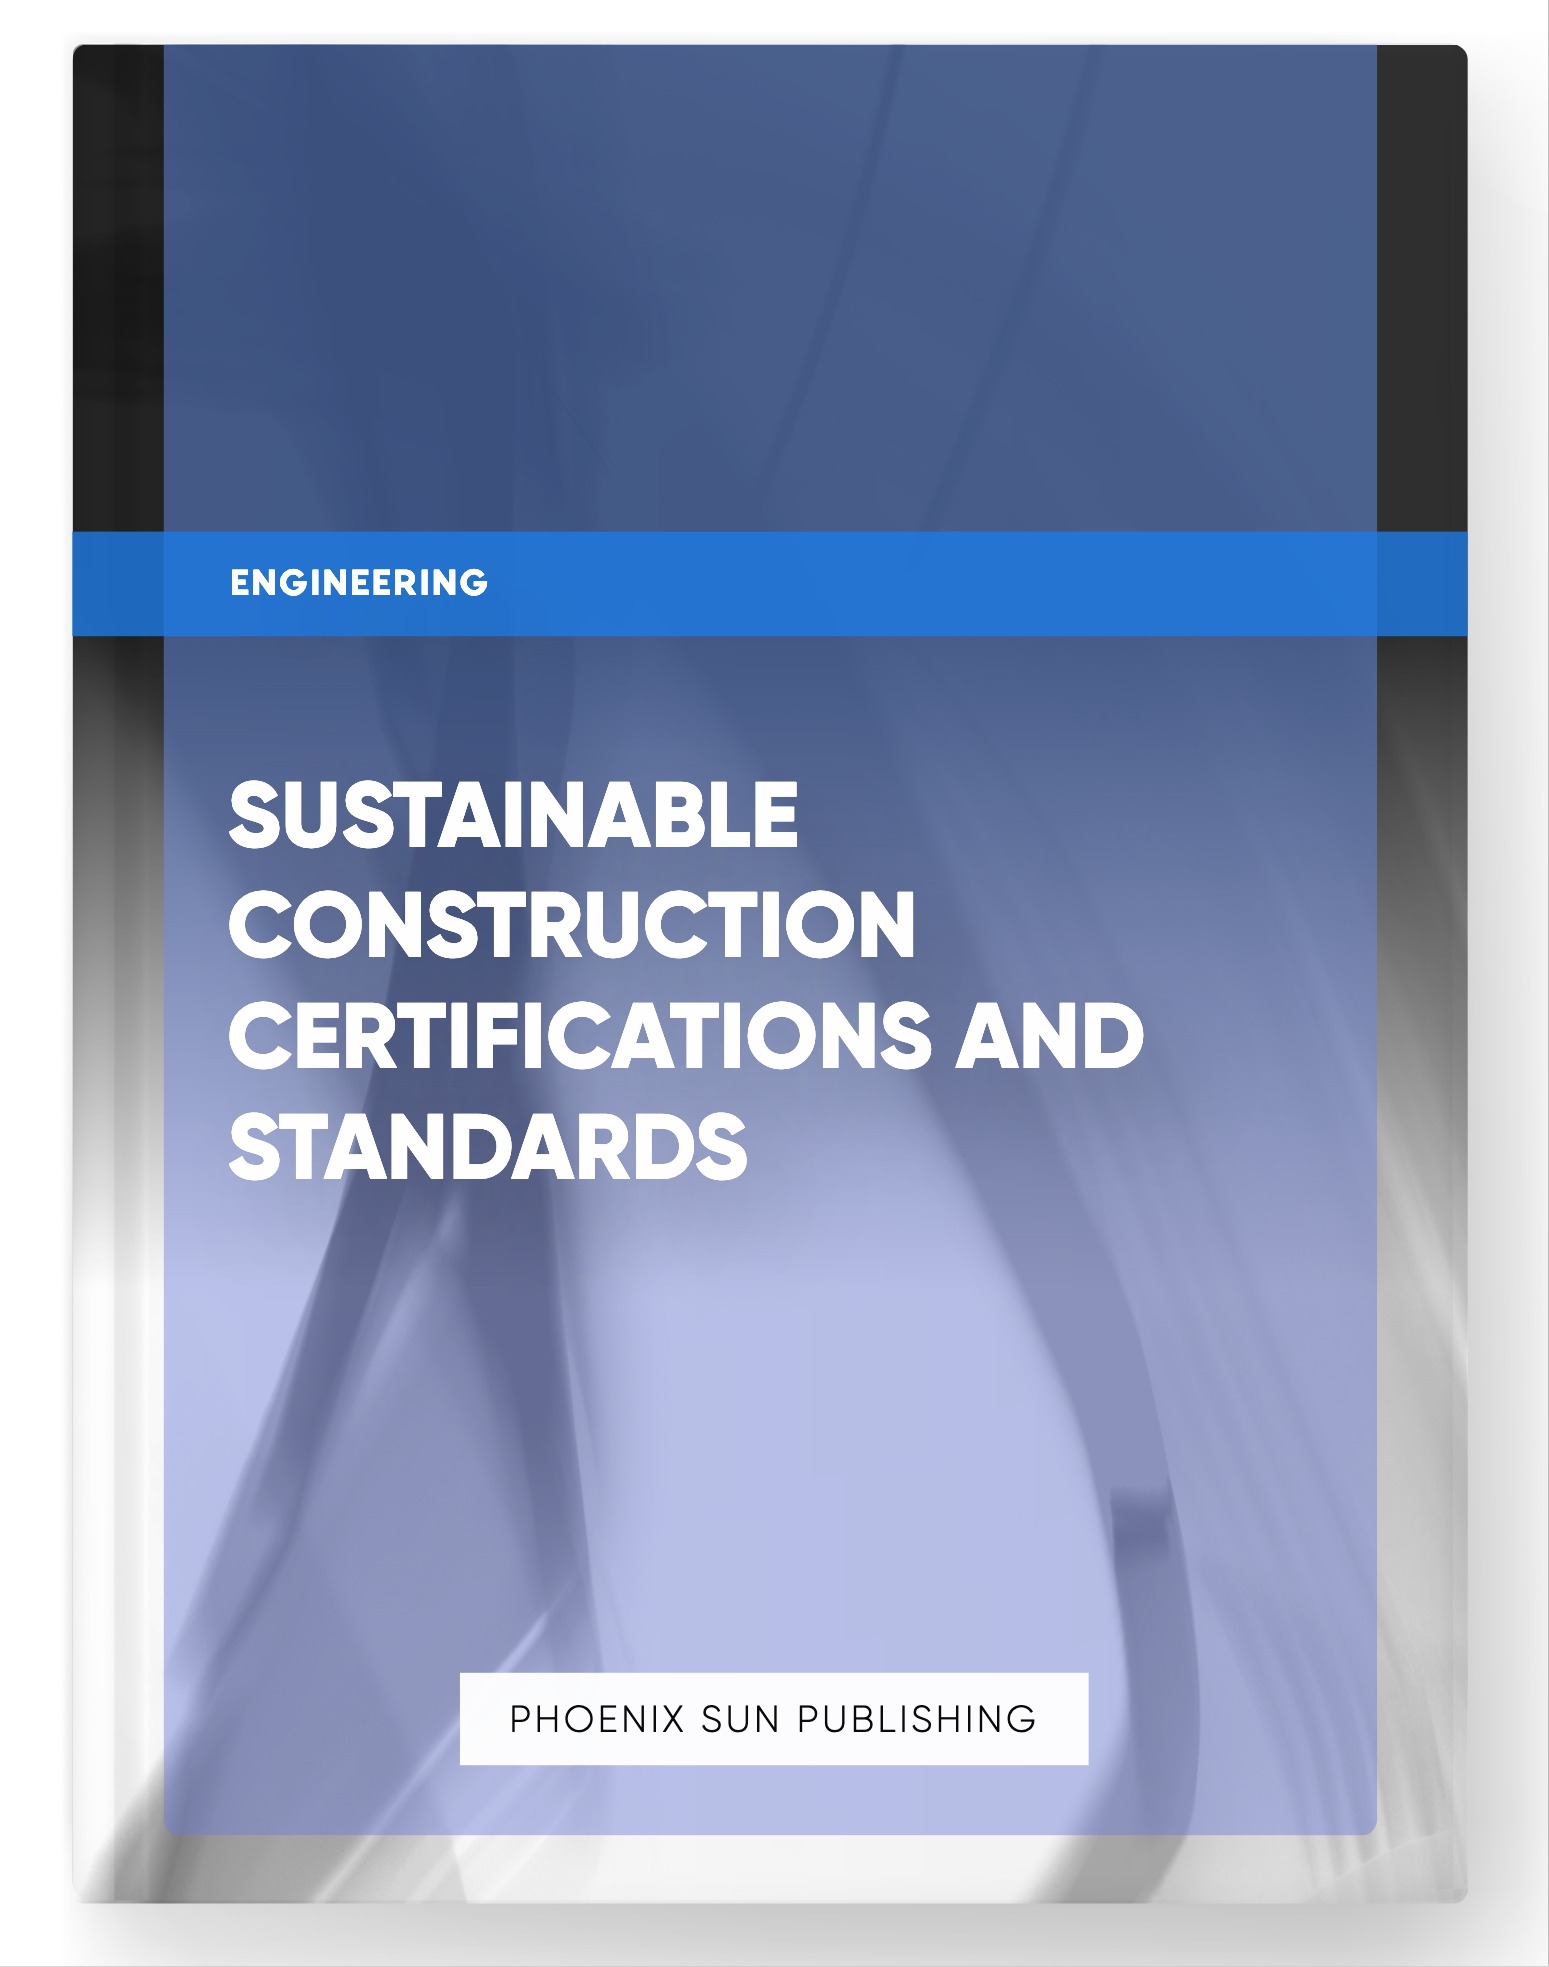 Sustainable Construction Certifications and Standards